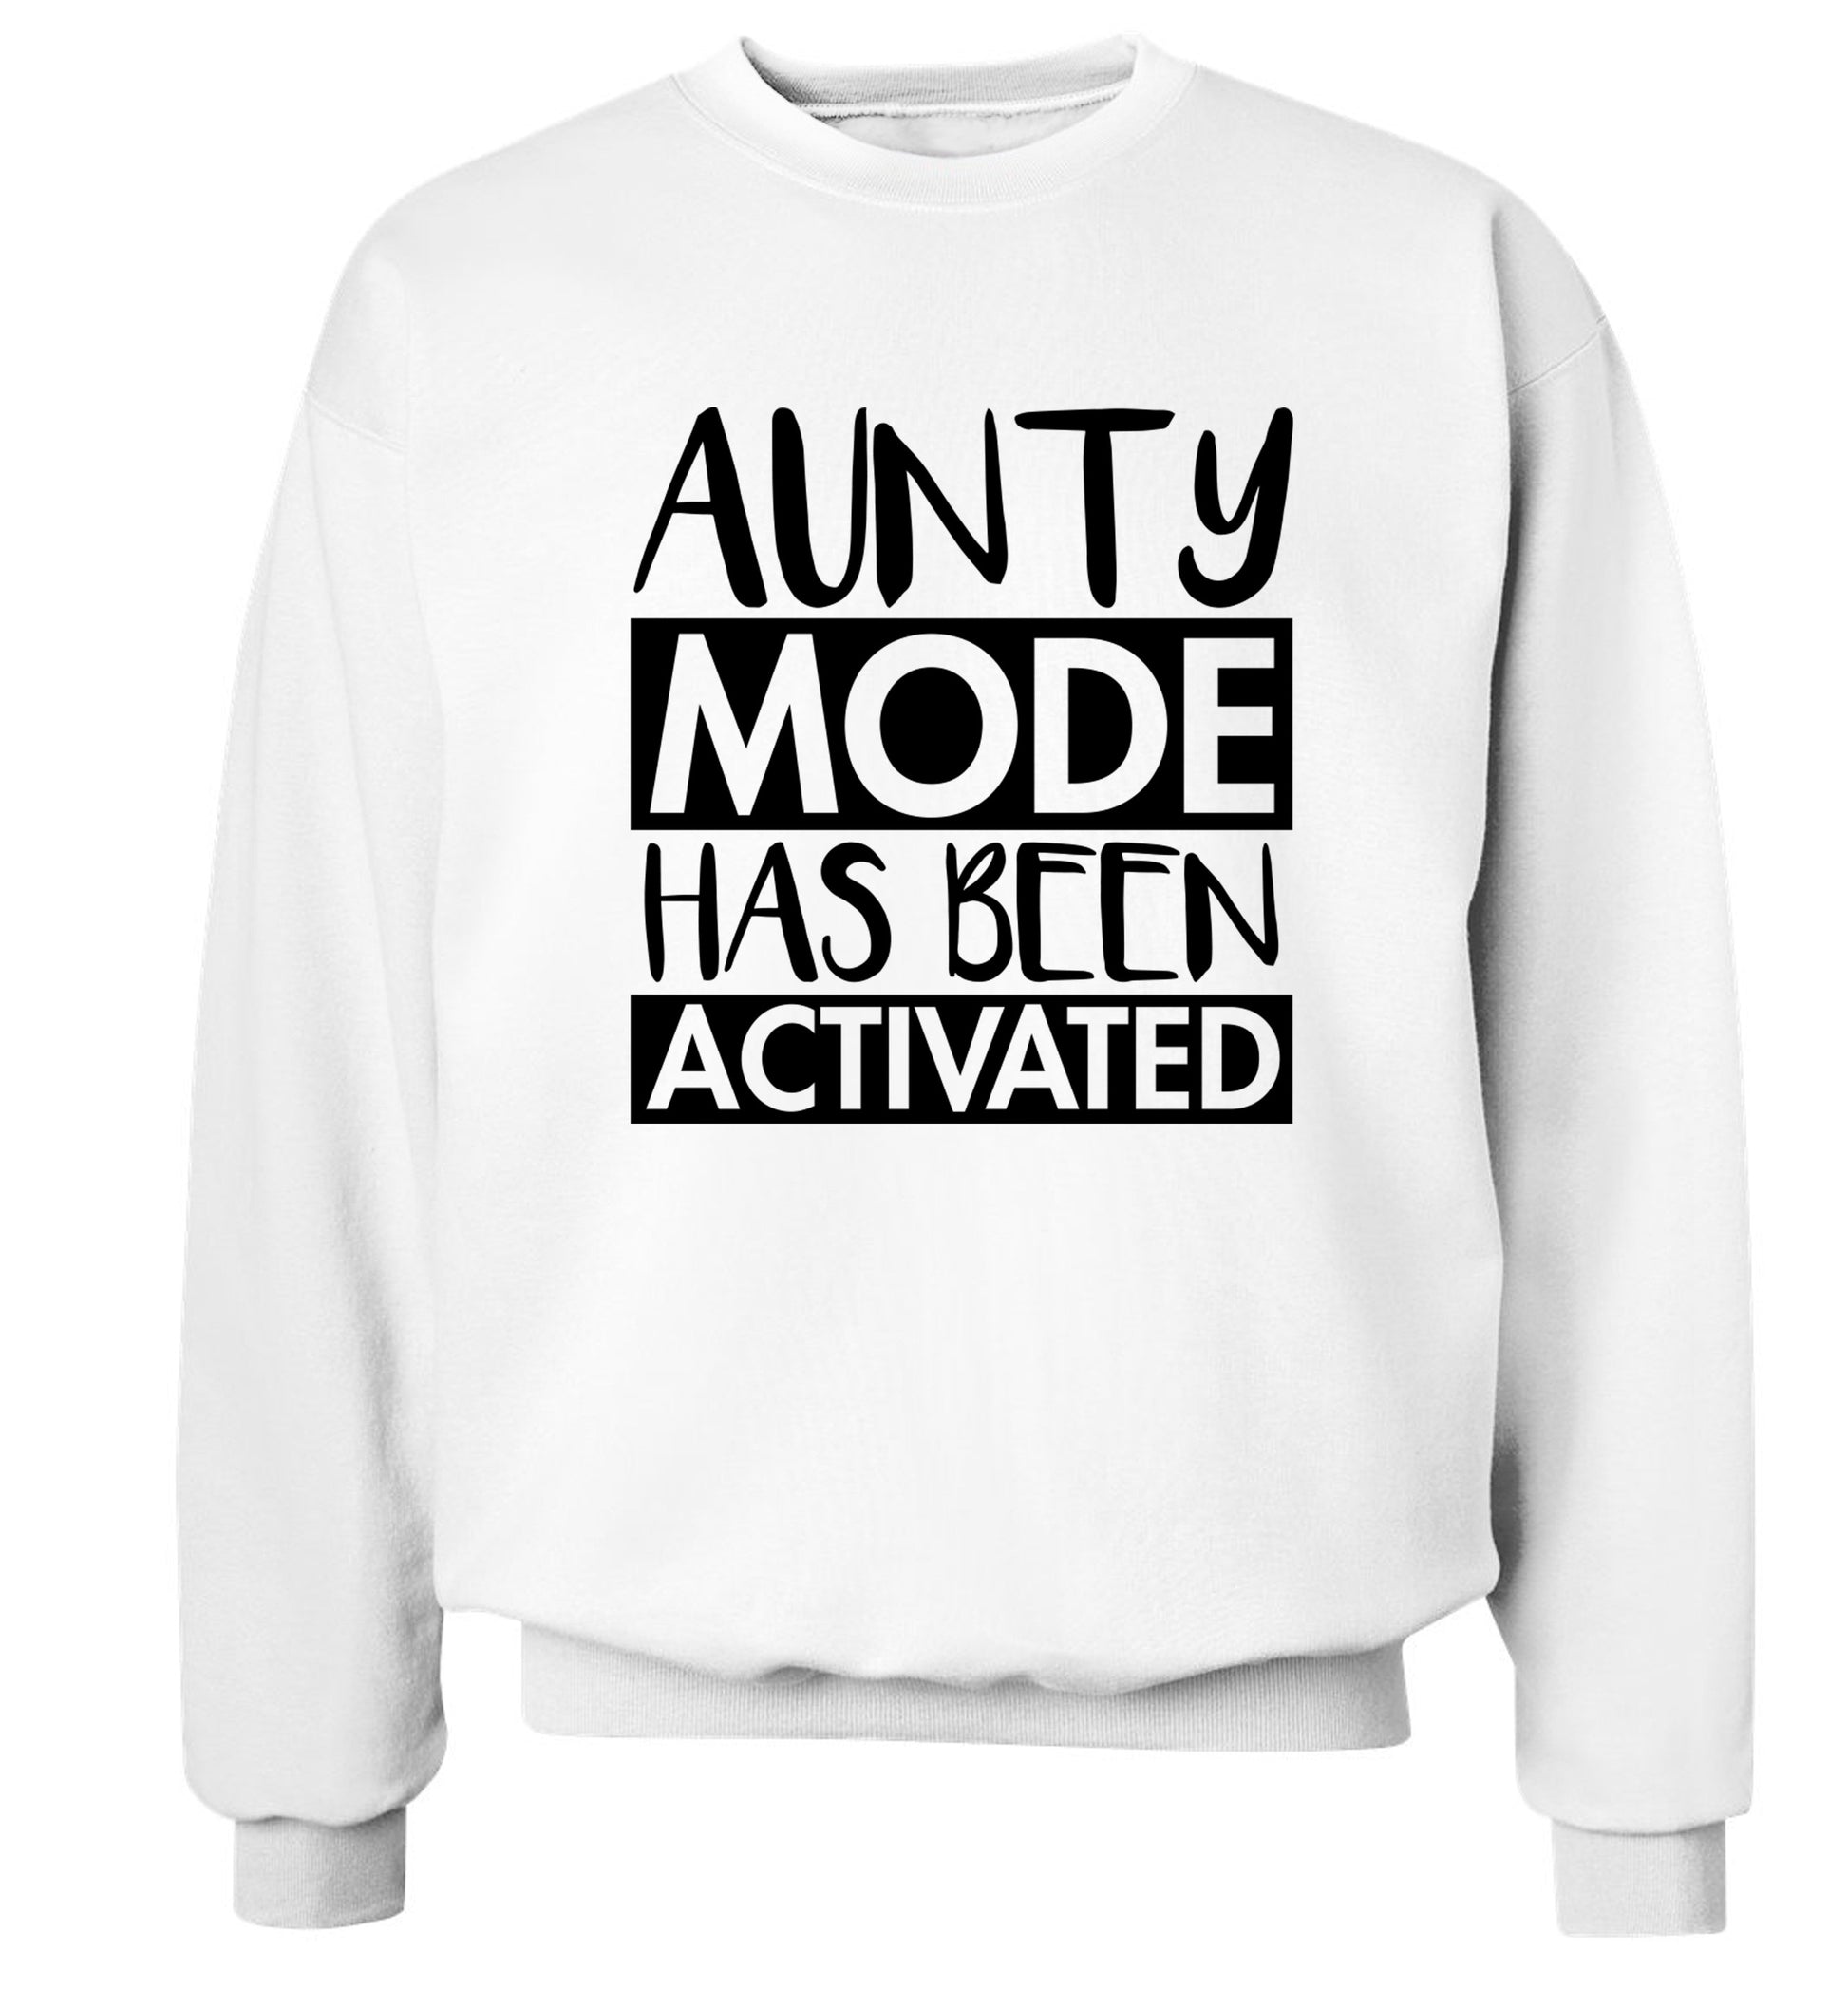 Aunty mode activated Adult's unisex white Sweater 2XL